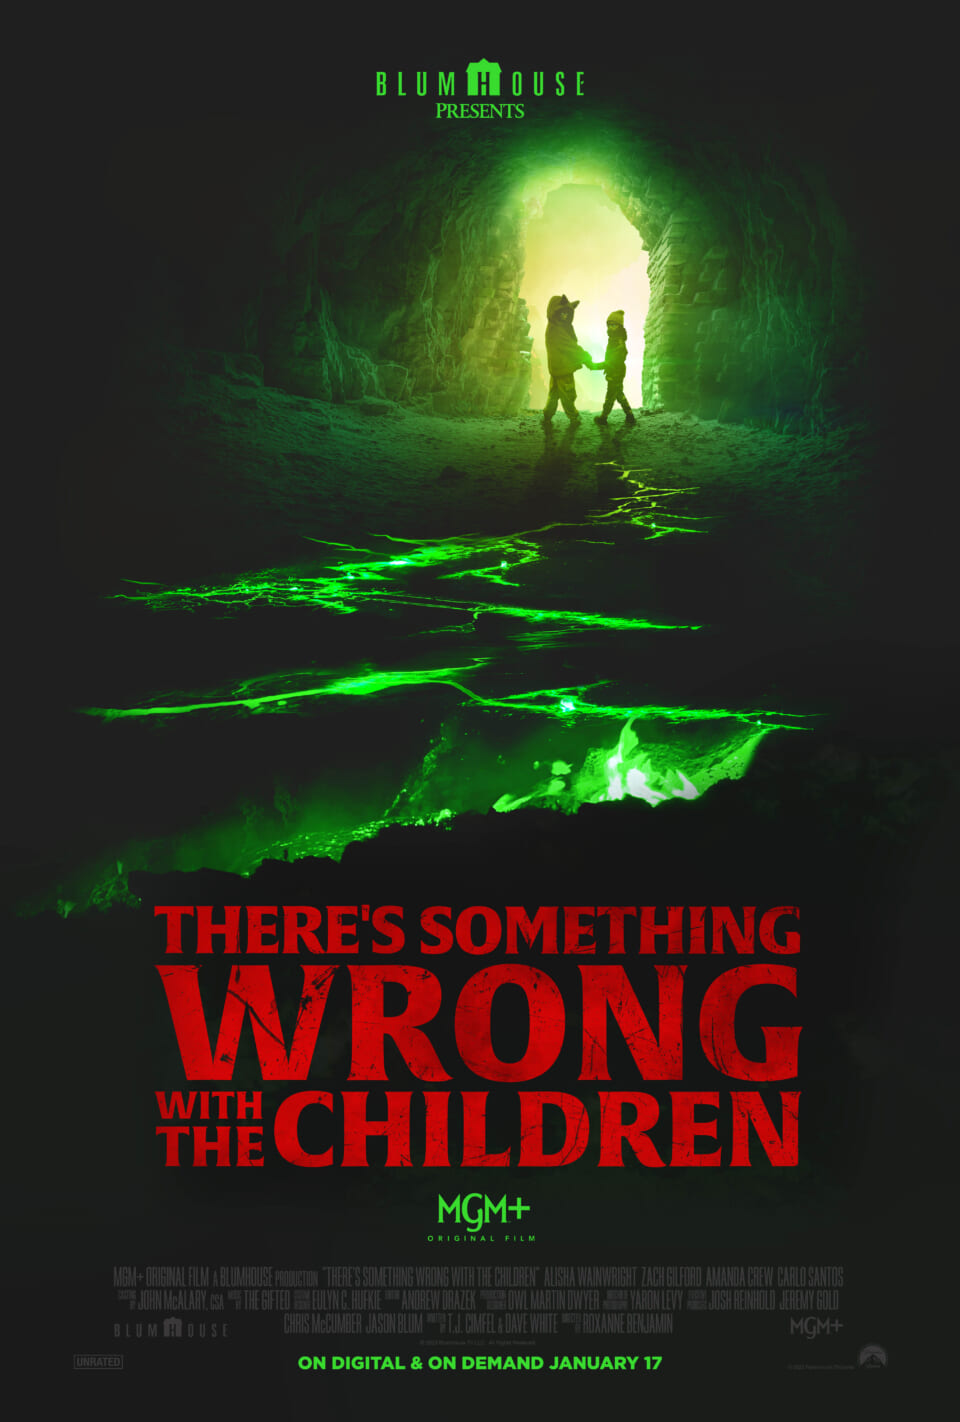 90723 WRON22 1sht FM7A 960x1422 - 'There's Something Wrong With The Children': The Title Says It All [Watch]